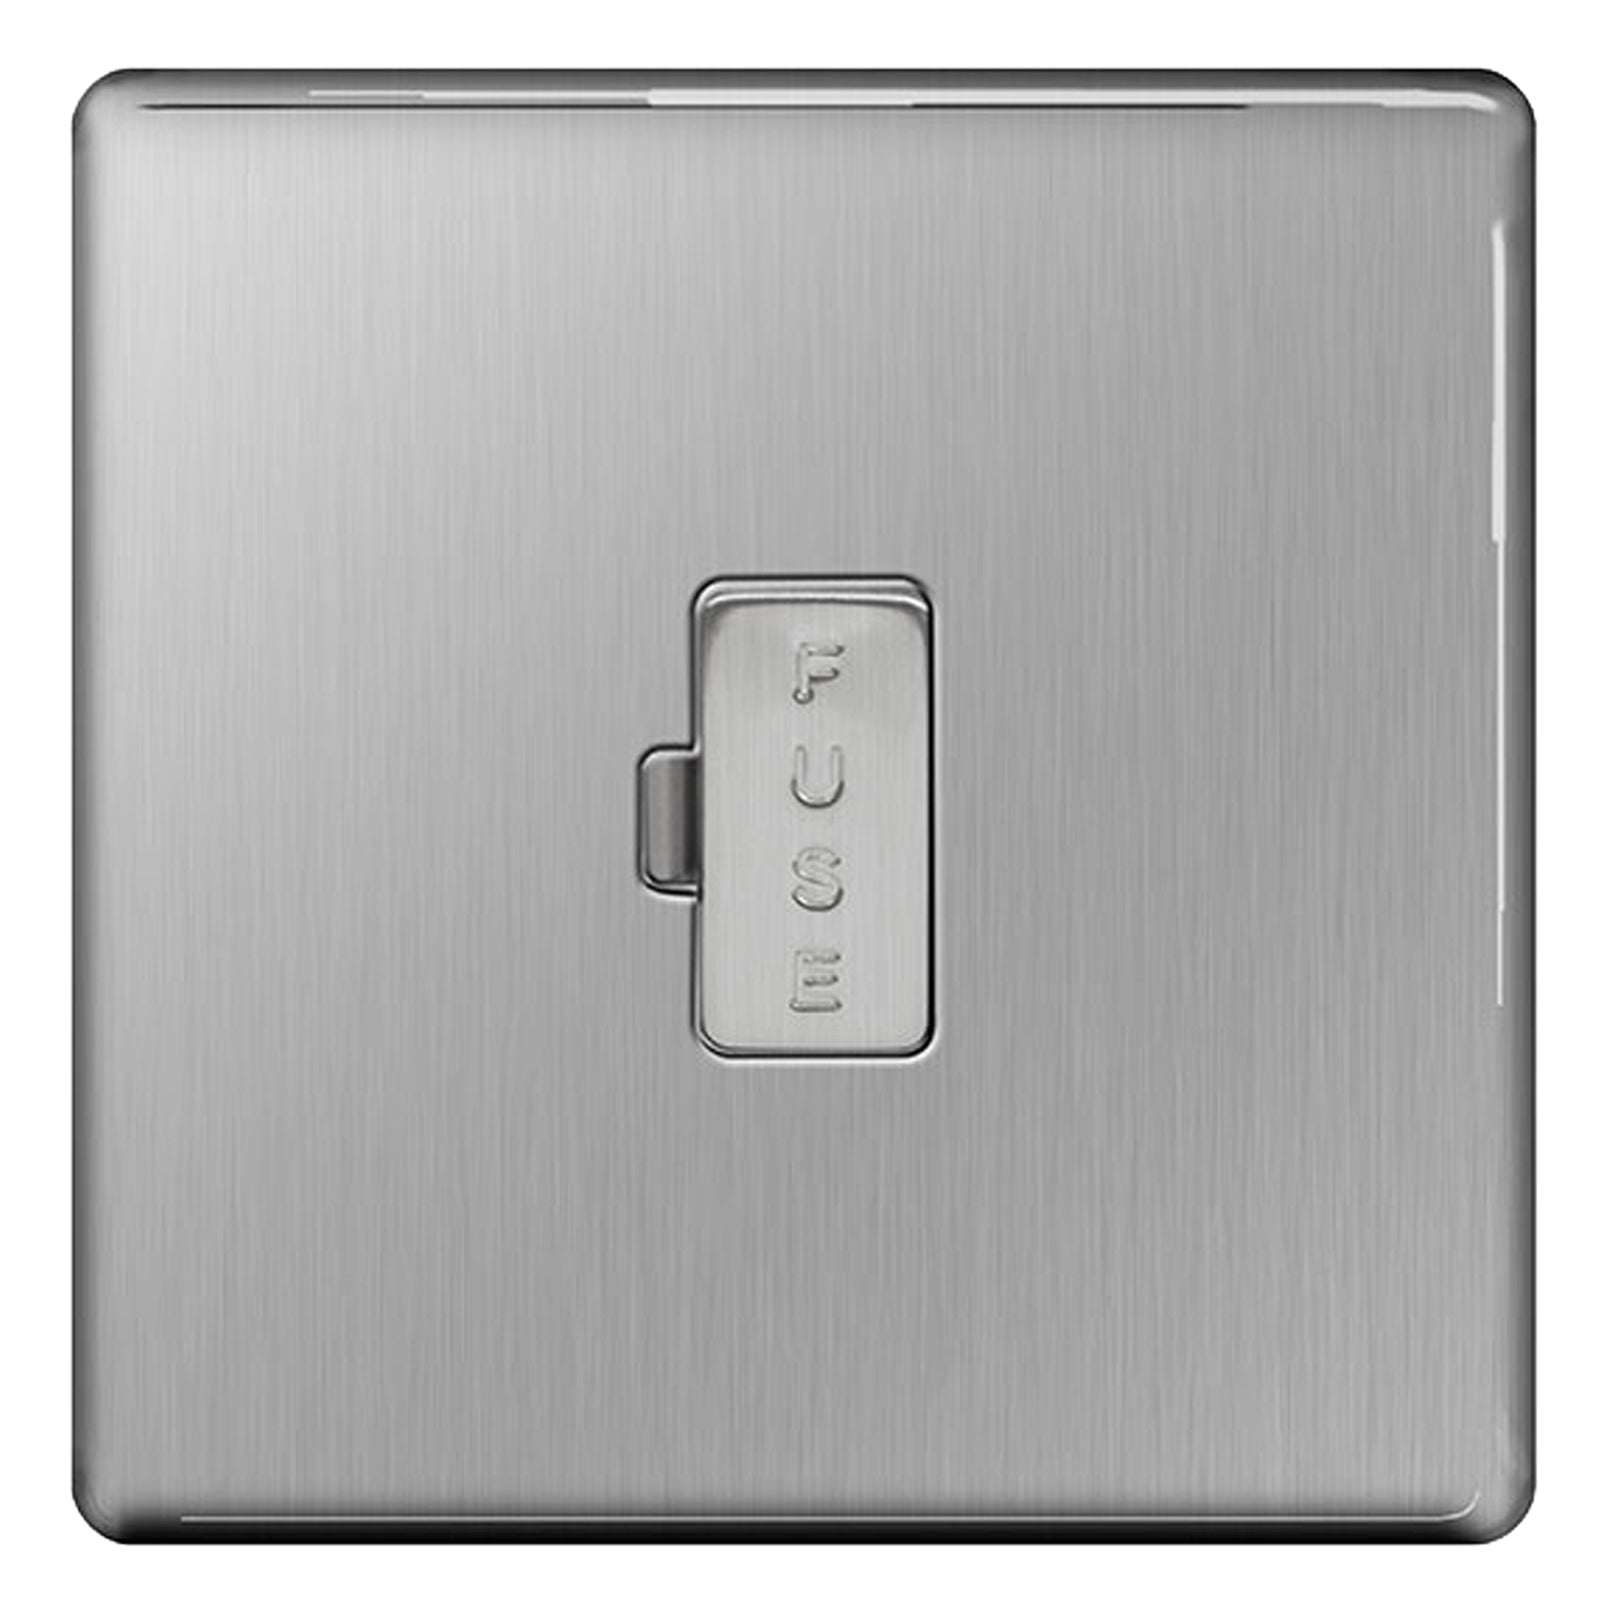 BG Nexus Screwless Flat Plate Brushed Steel Switches and Sockets Grey Inserts Full Range Unswitched Fused Spur FBS54 – Masterlec